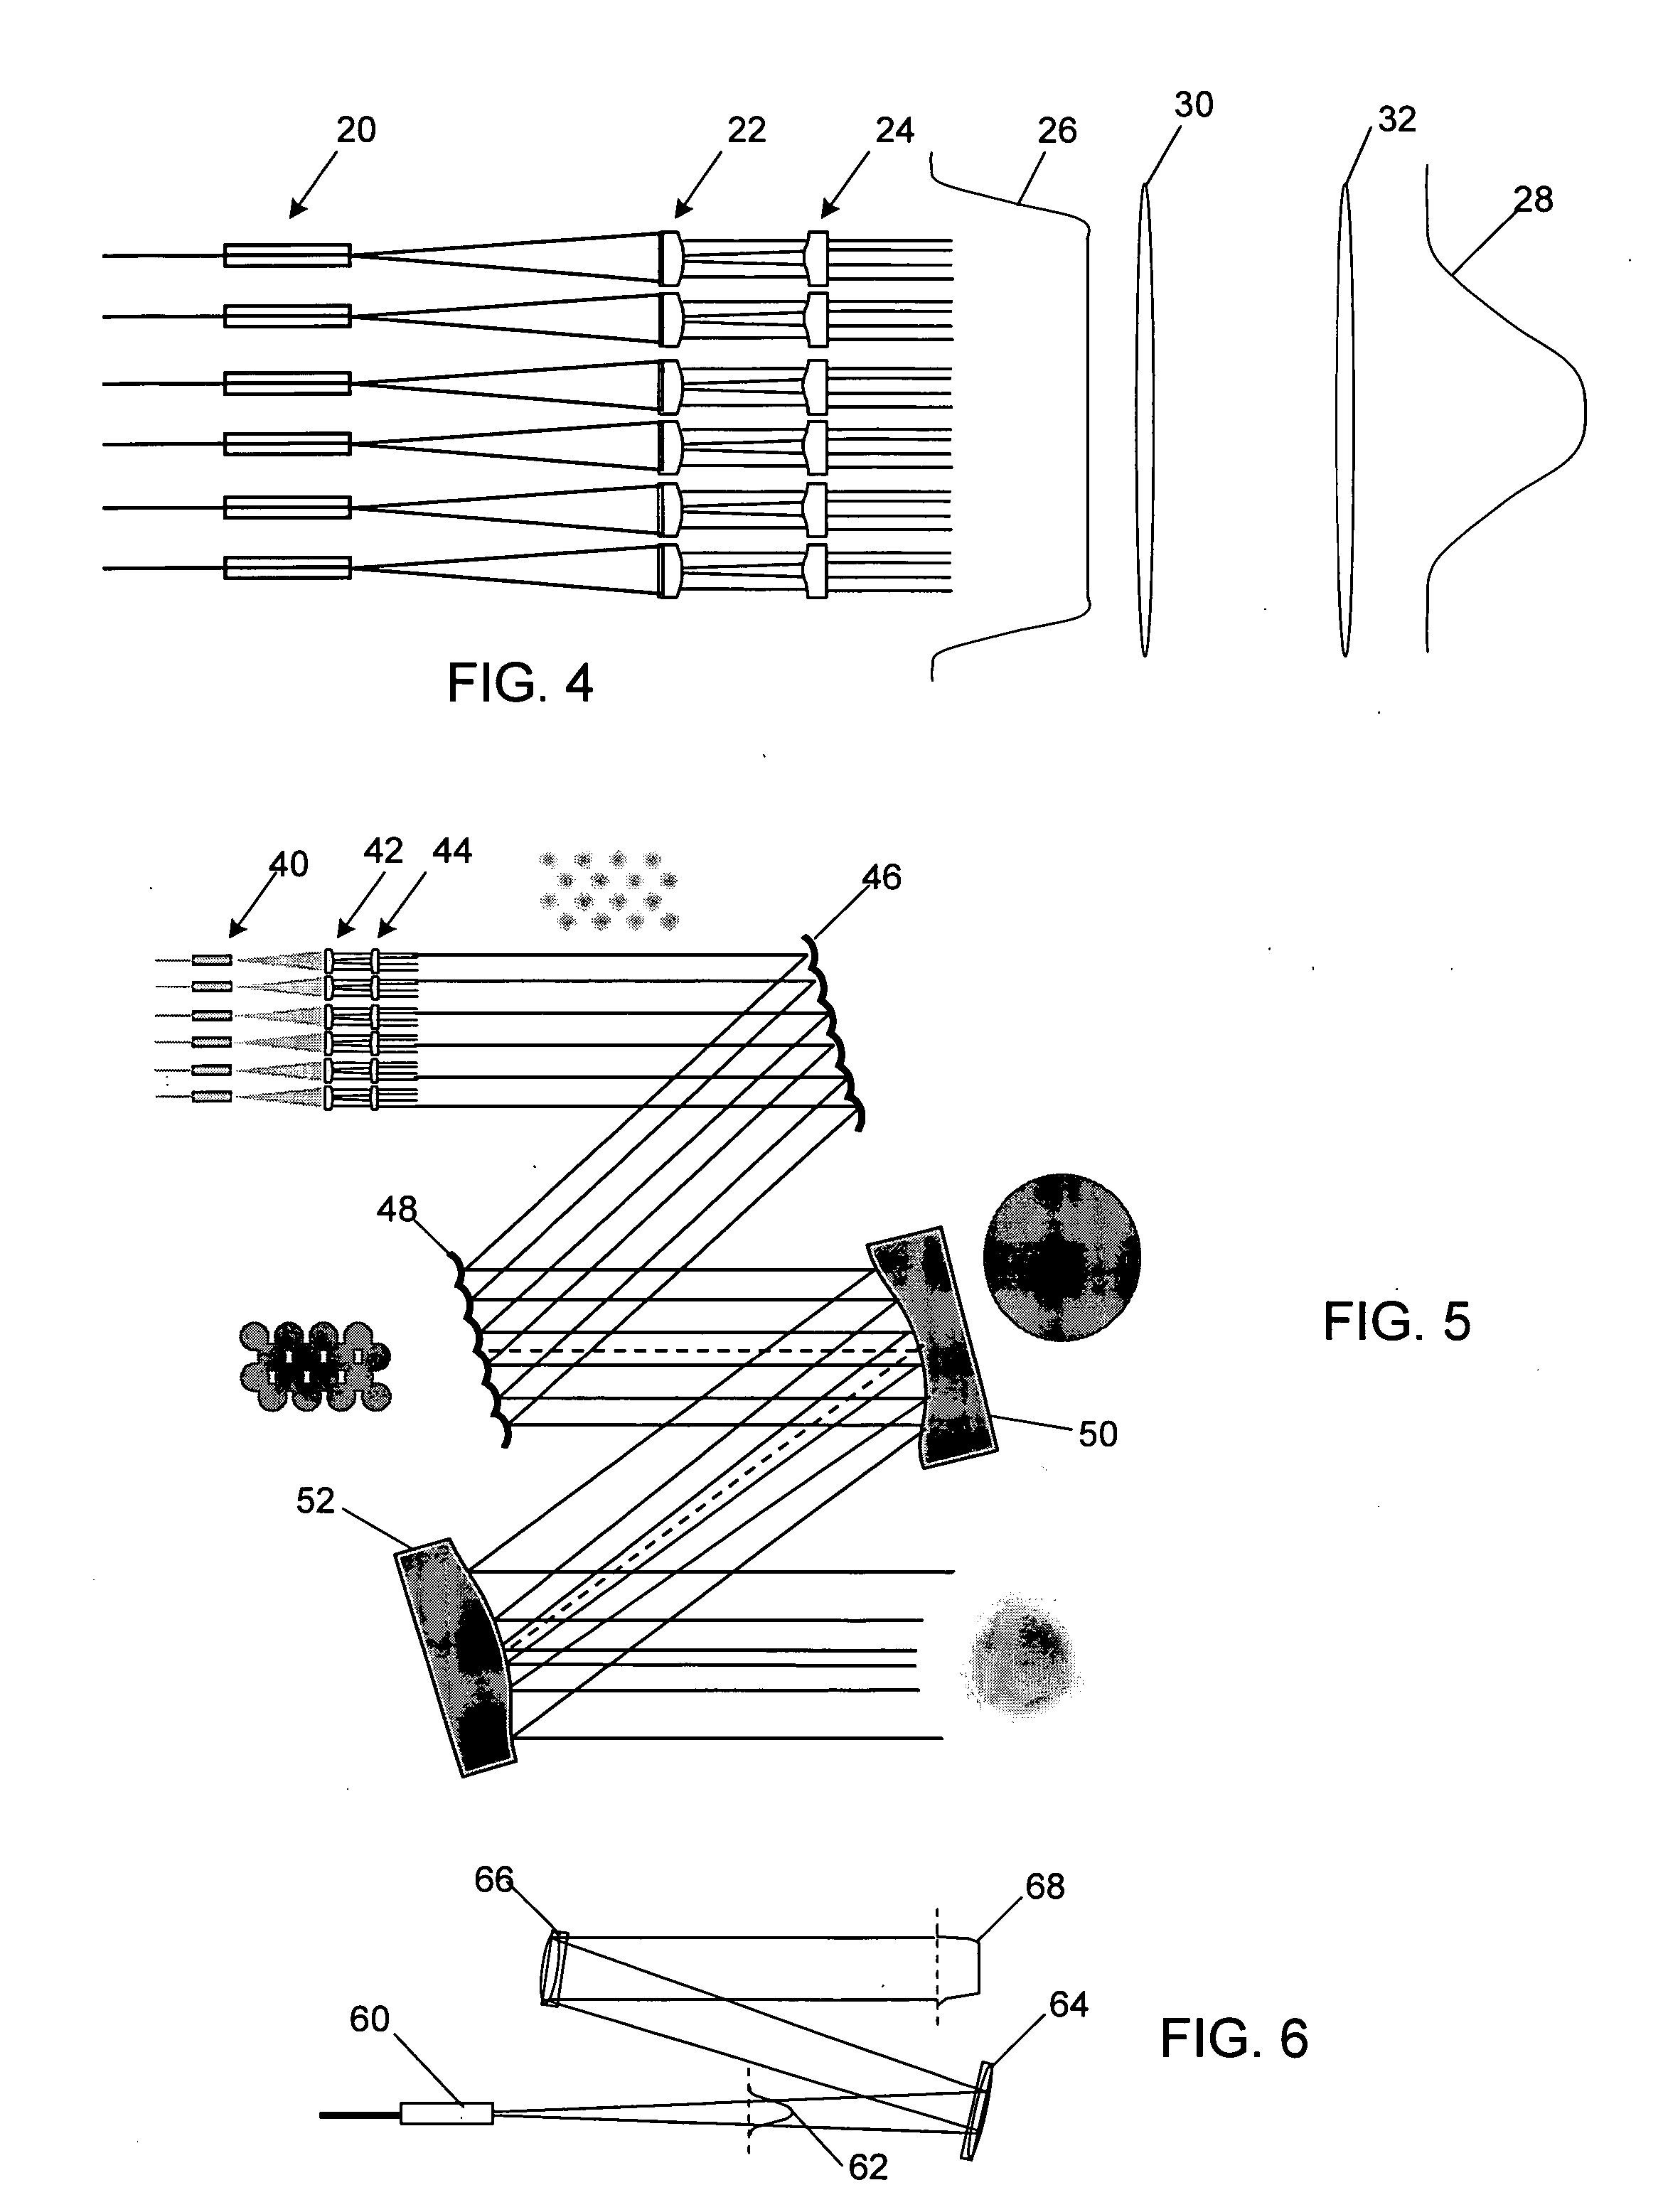 Method and apparatus for optimizing the target intensity distribution transmitted from a fiber coupled array